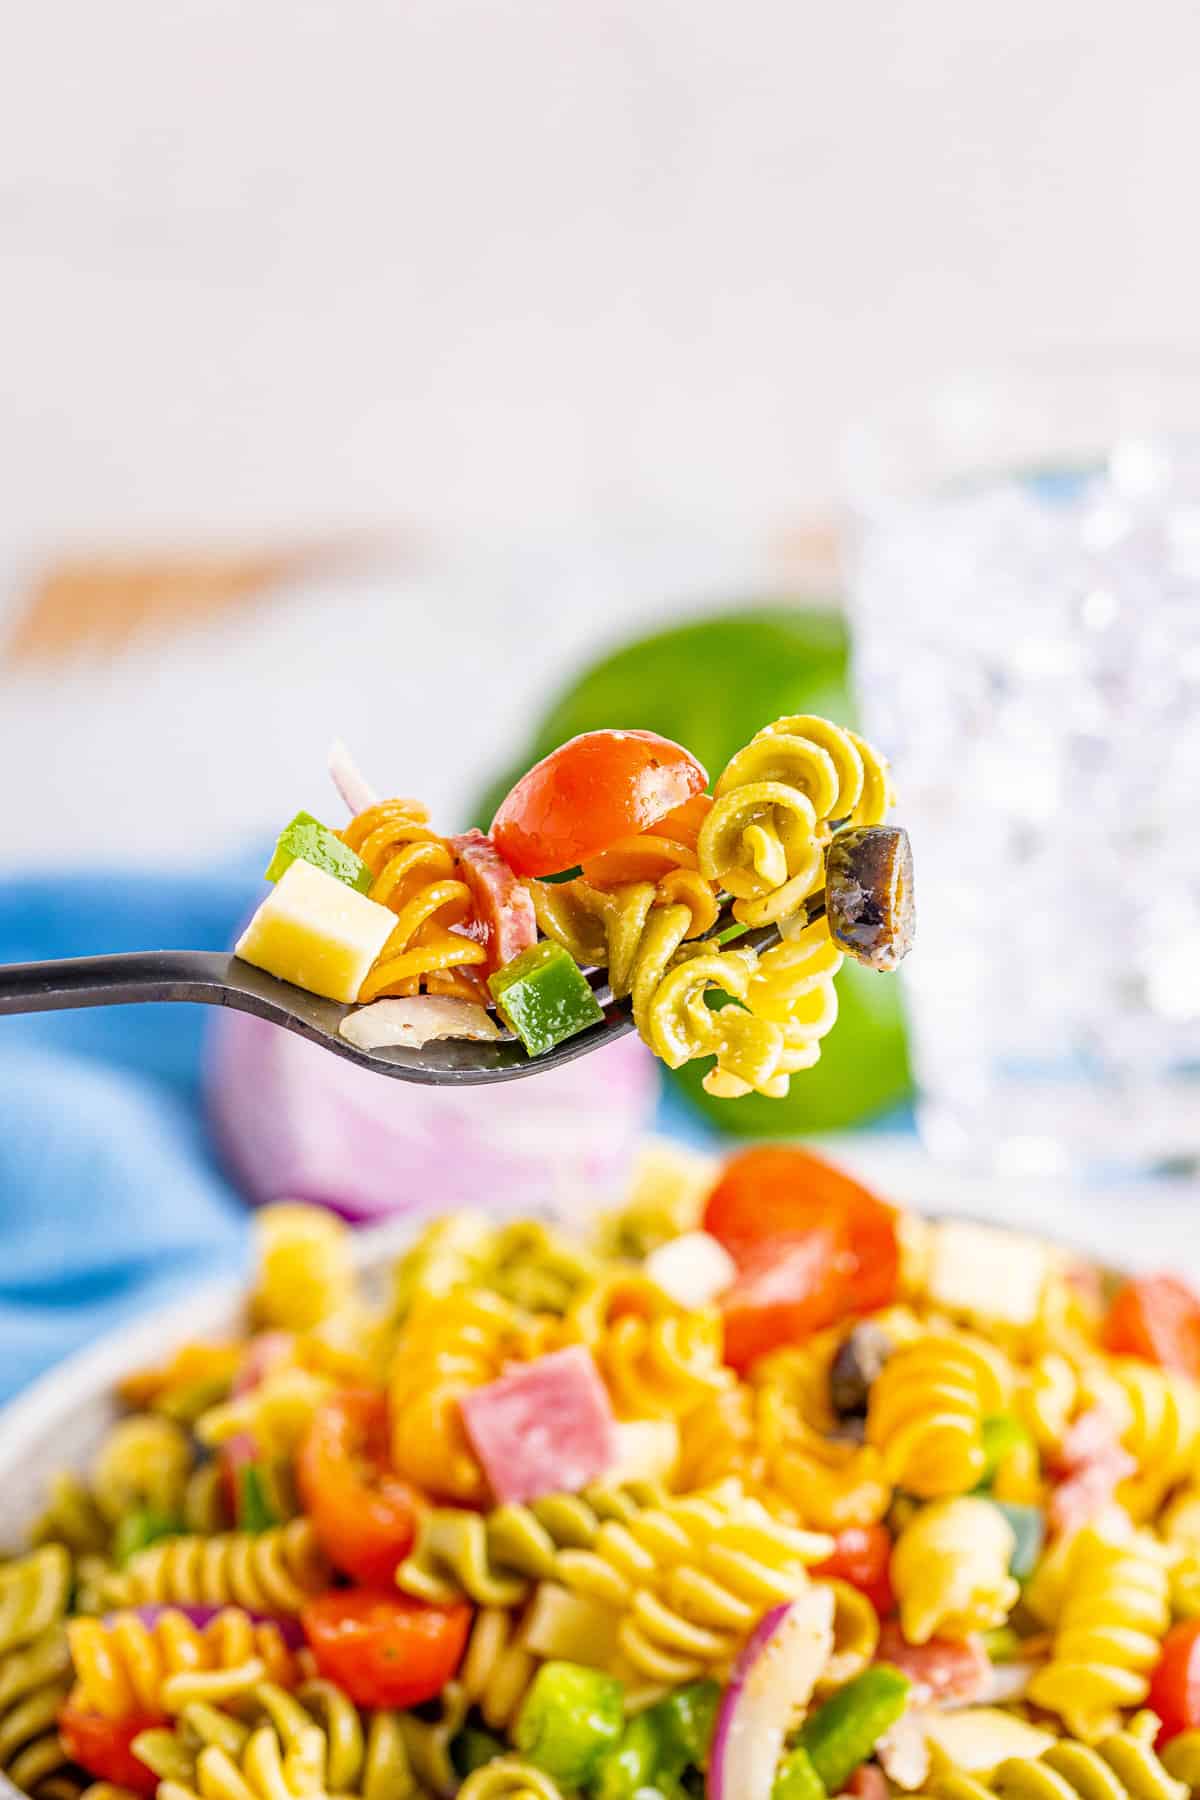 Fork with bite of pasta salad containing rotini, grape tomato, diced green pepper, and mozzarella cheese.